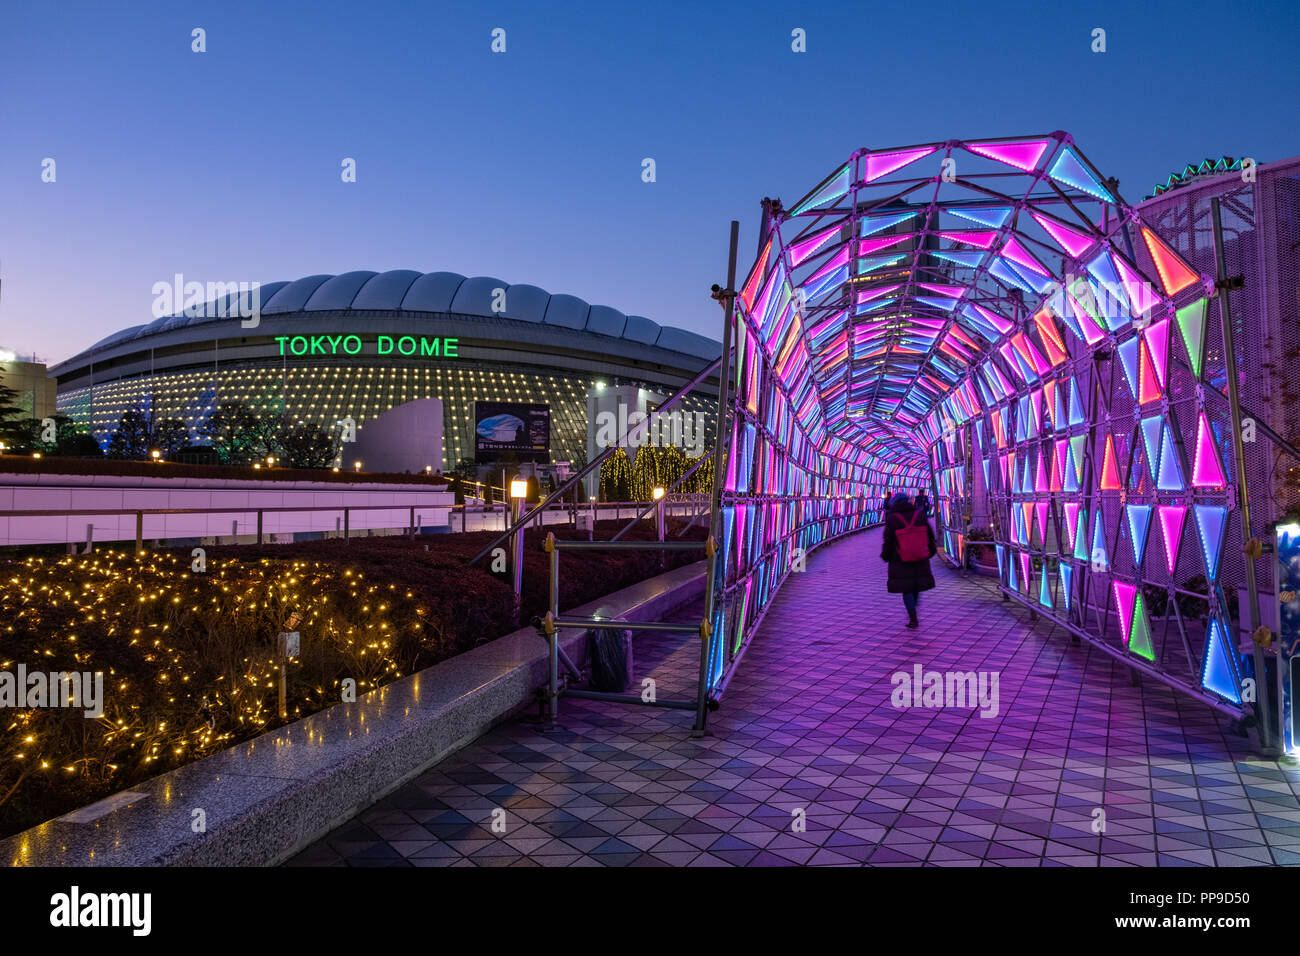 TOKYO, JAPAN - 13 FEB 2018: Tokyo Dome arena and neon light tunnel at blue hour Stock Photo